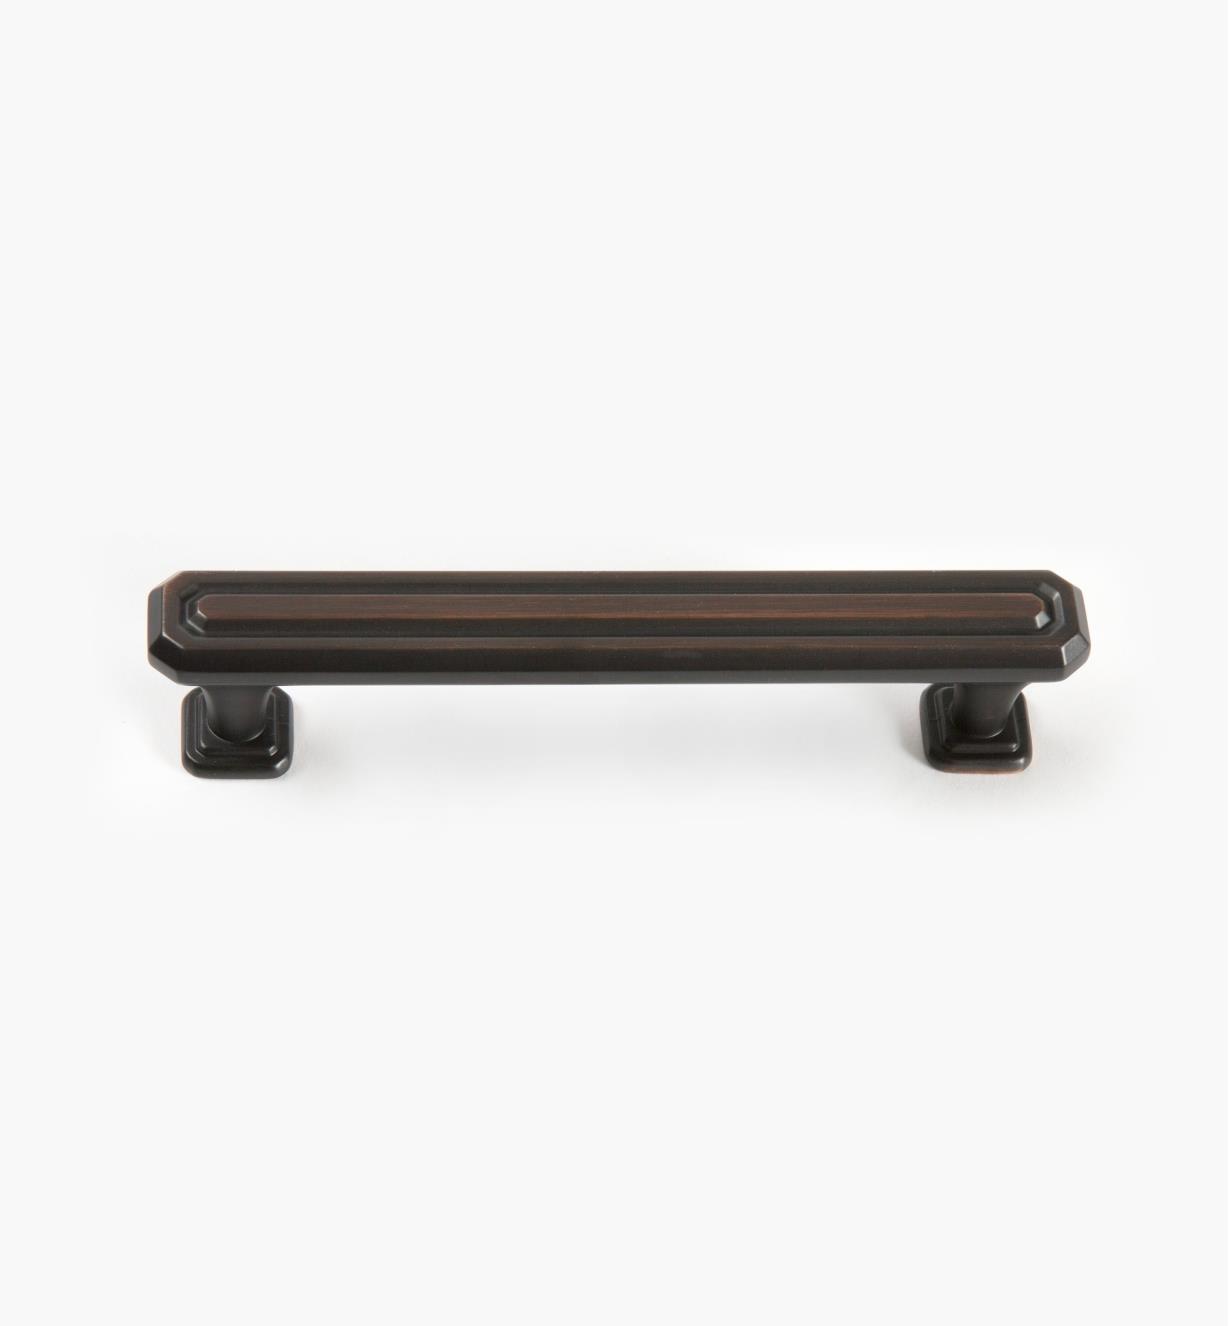 02A1608 - Wells Oil-Rubbed Bronze 128mm x 37mm Handle, each